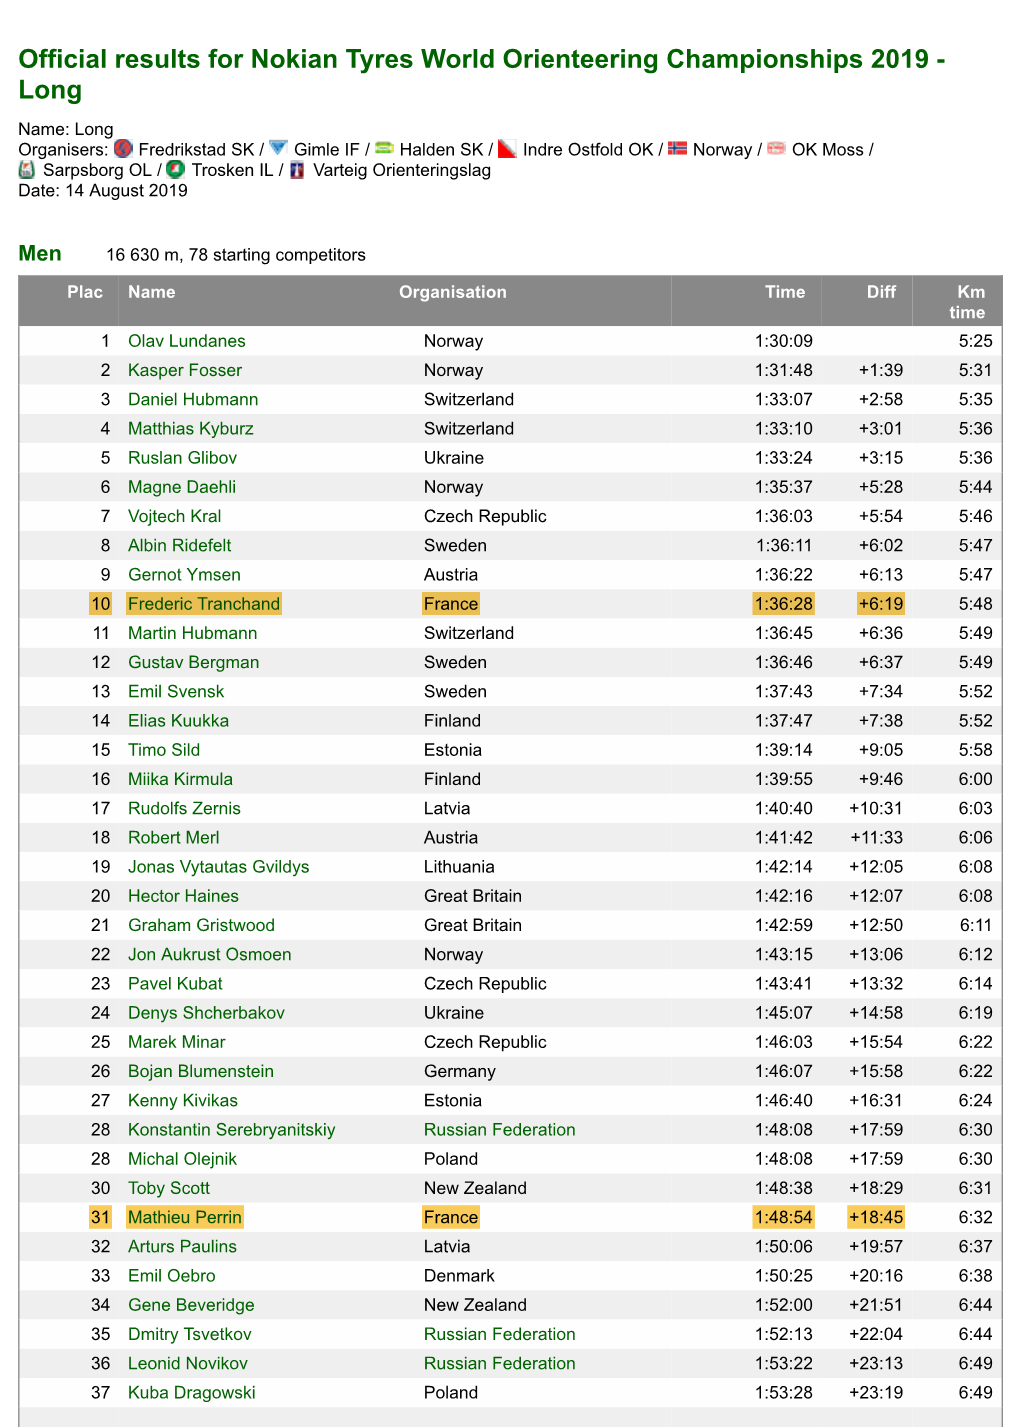 Official Results for Nokian Tyres World Orienteering Championships 2019